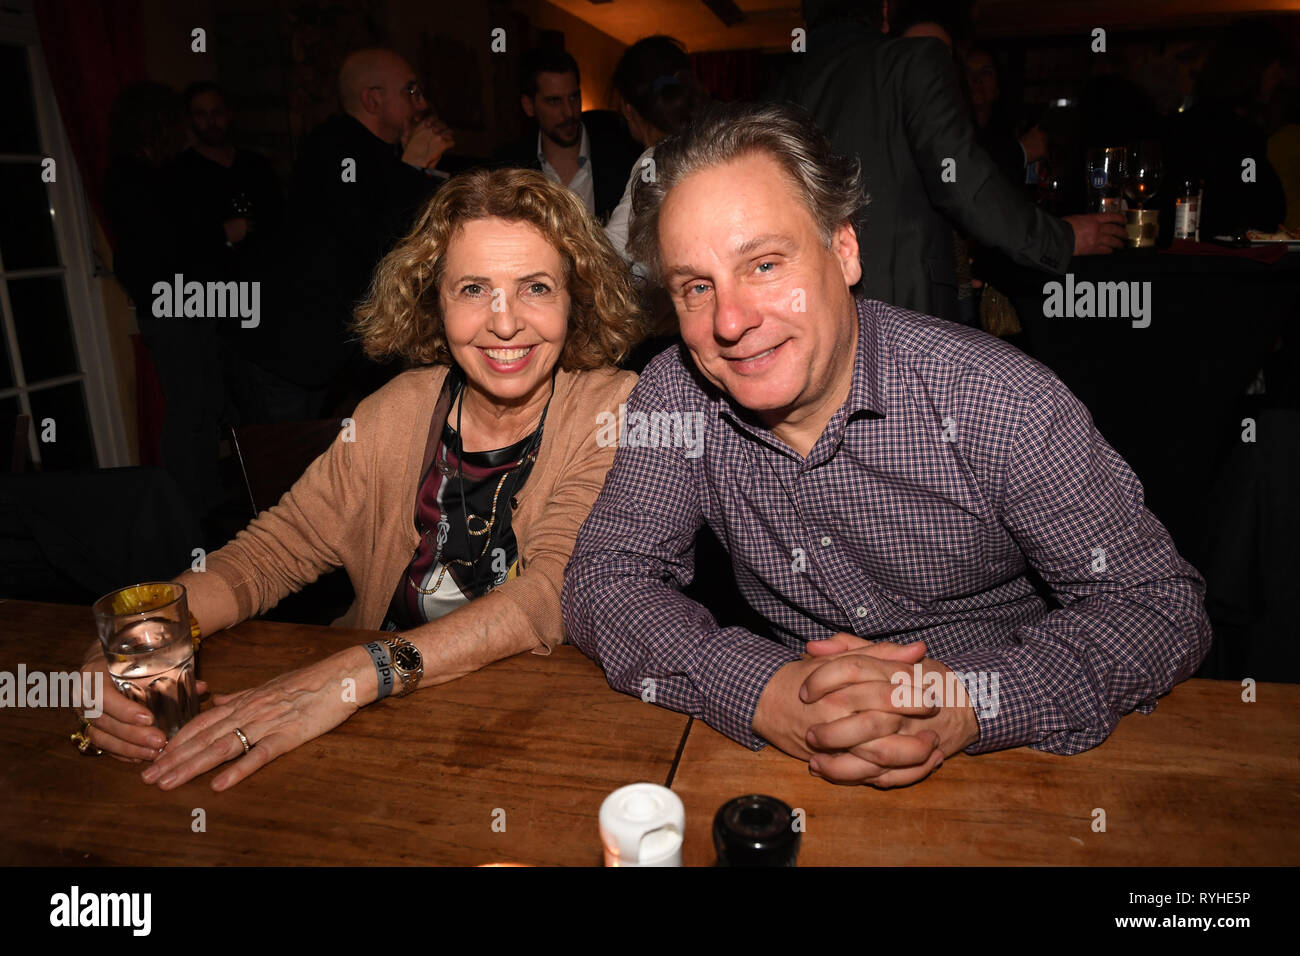 13 March 2019, Bavaria, München: The actress Michaela May and the director Andi Niessner celebrate at the After Work Party of the production company ndf in the Parkcafe. Photo: Felix Hörhager/dpa Stock Photo